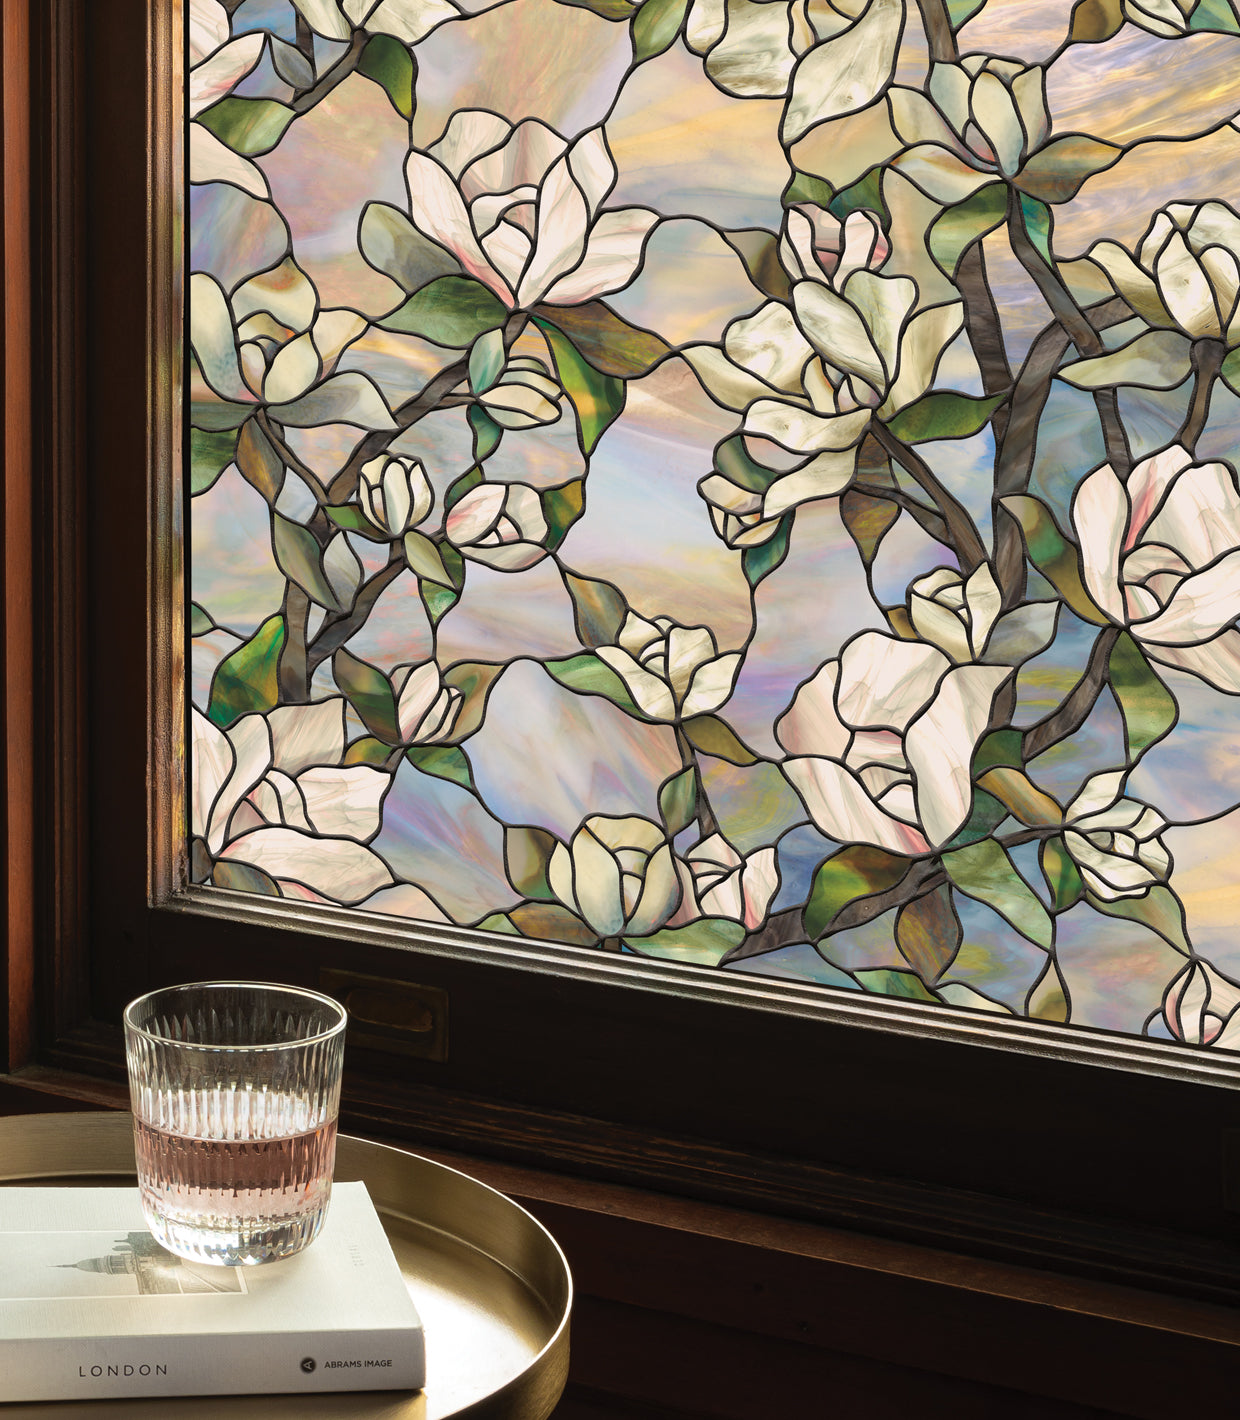 A drink in a glass placed on a book, which rests on a gold-colored metallic circular serving tray, set against a window with a rich, dark wood frame. The window is adorned with Artscape's Star Magnolia window film, a floral pattern that mimics stained glass, enhancing the room's aesthetic.